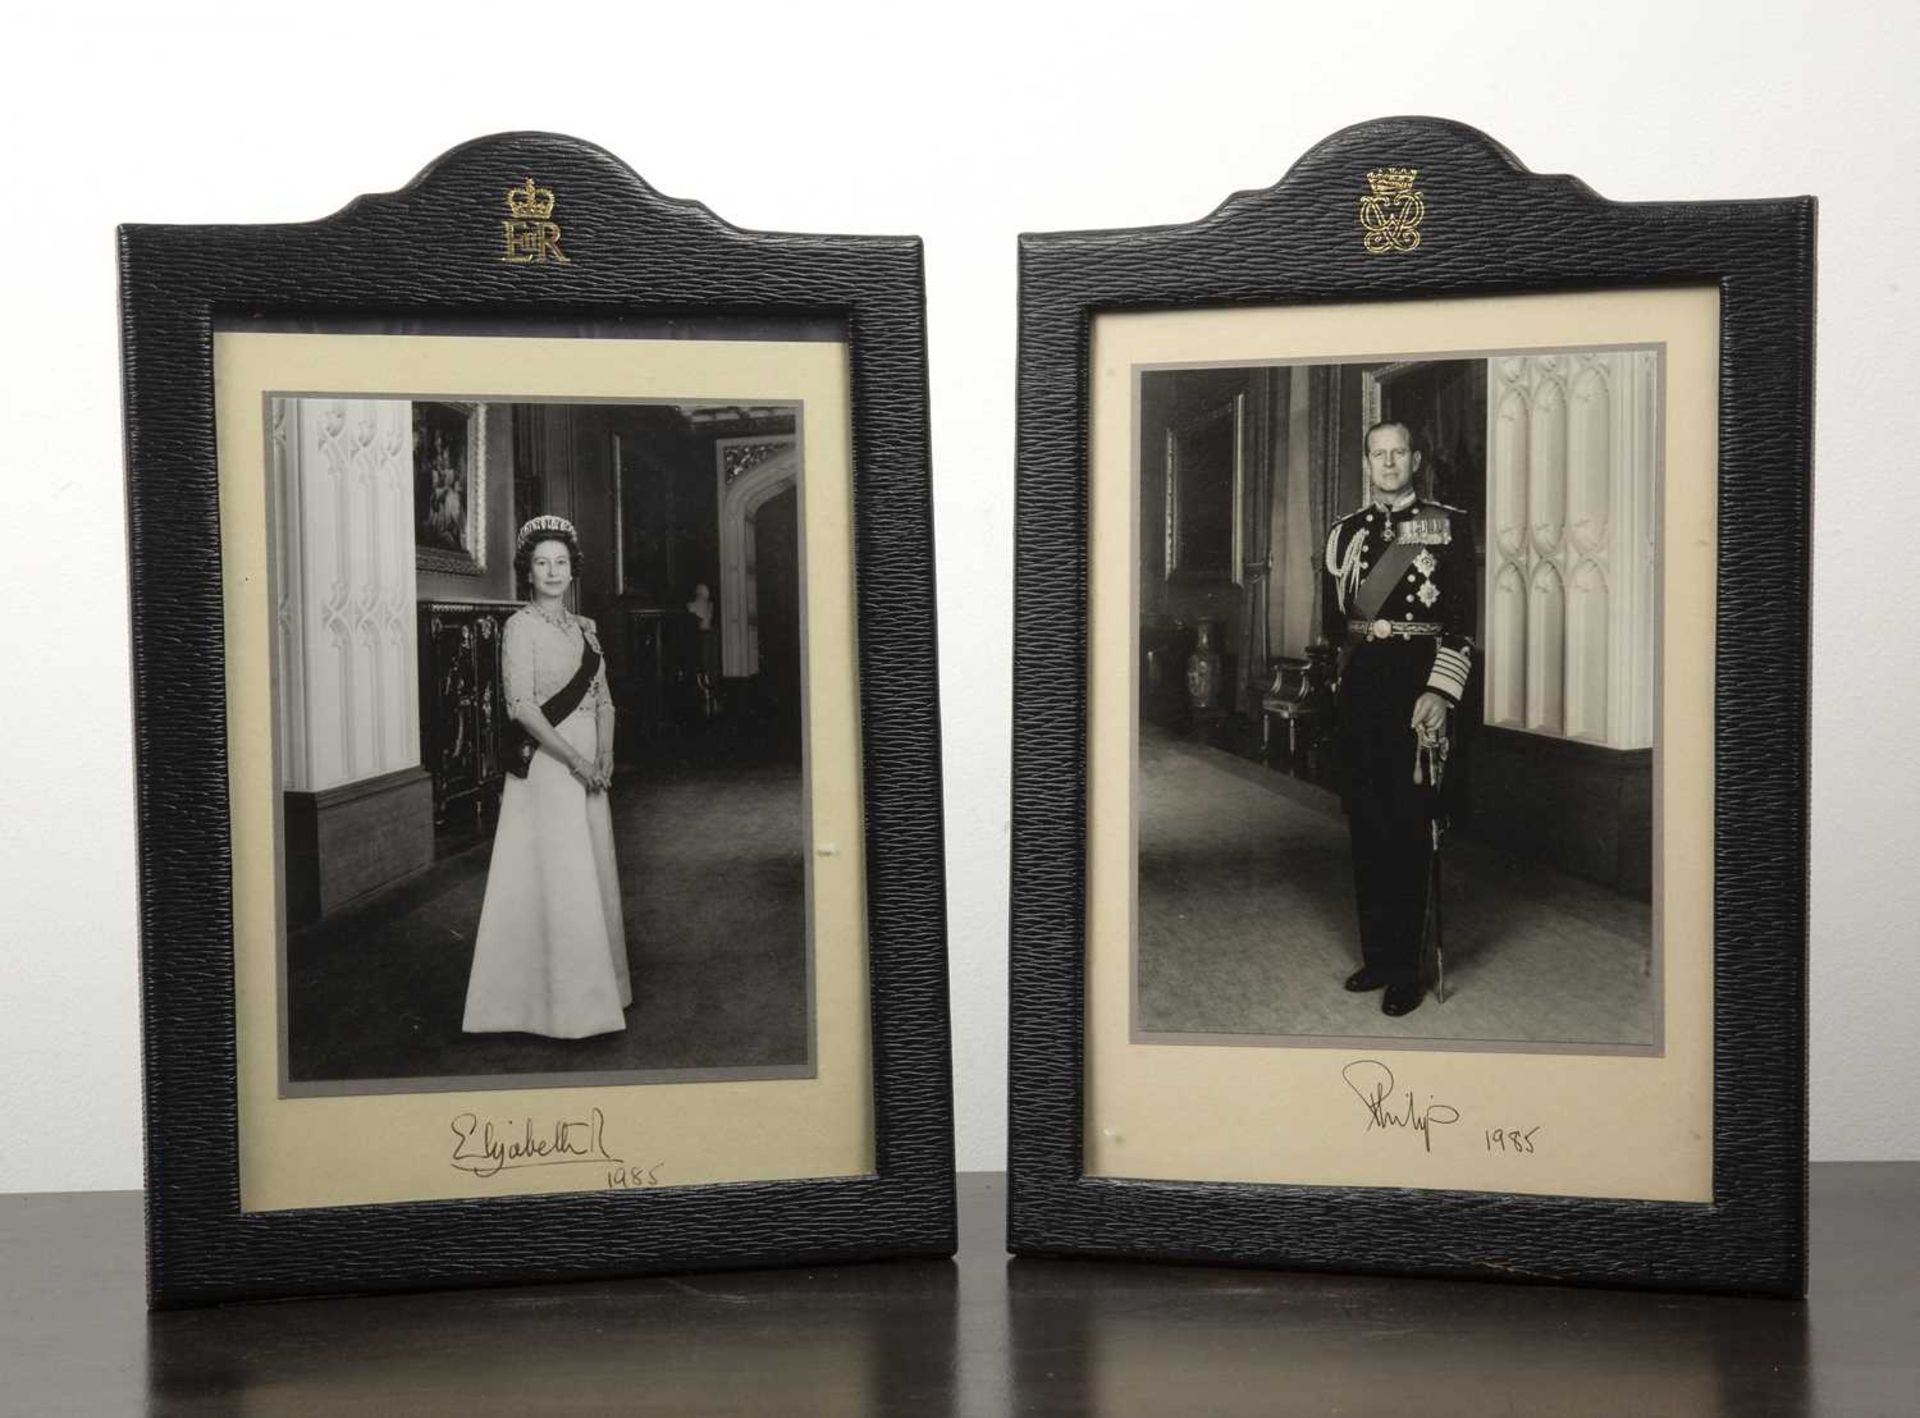 Pair of full-length photograph studies of Queen Elizabeth II and Prince Philip both signed and dated